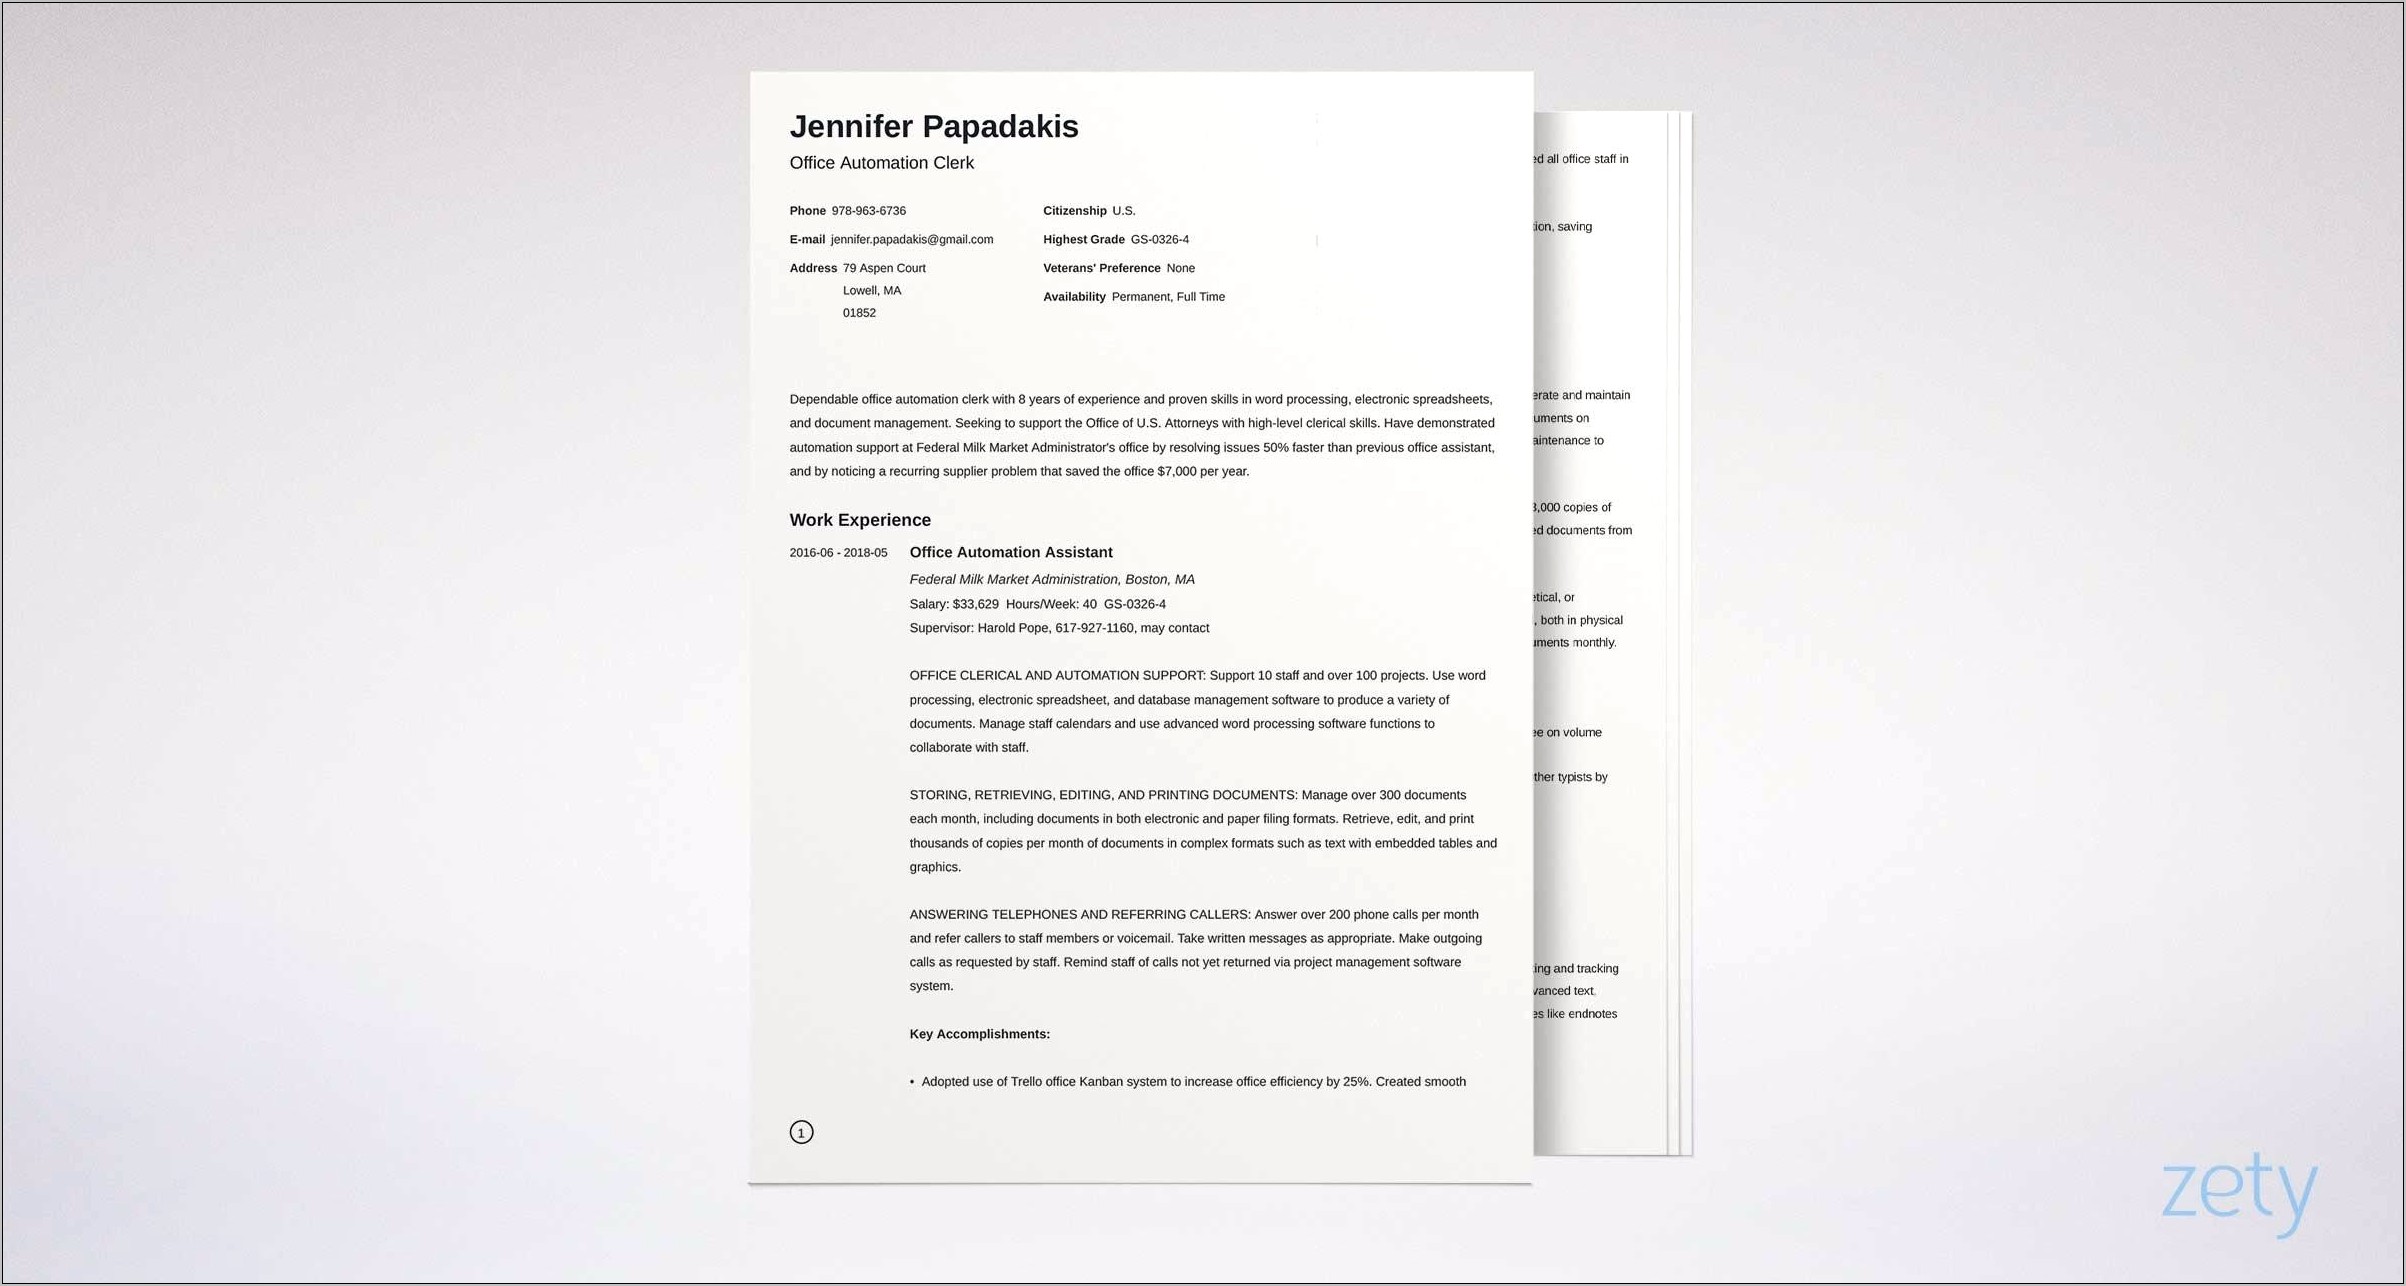 Recommended Word Processing Format For Resume